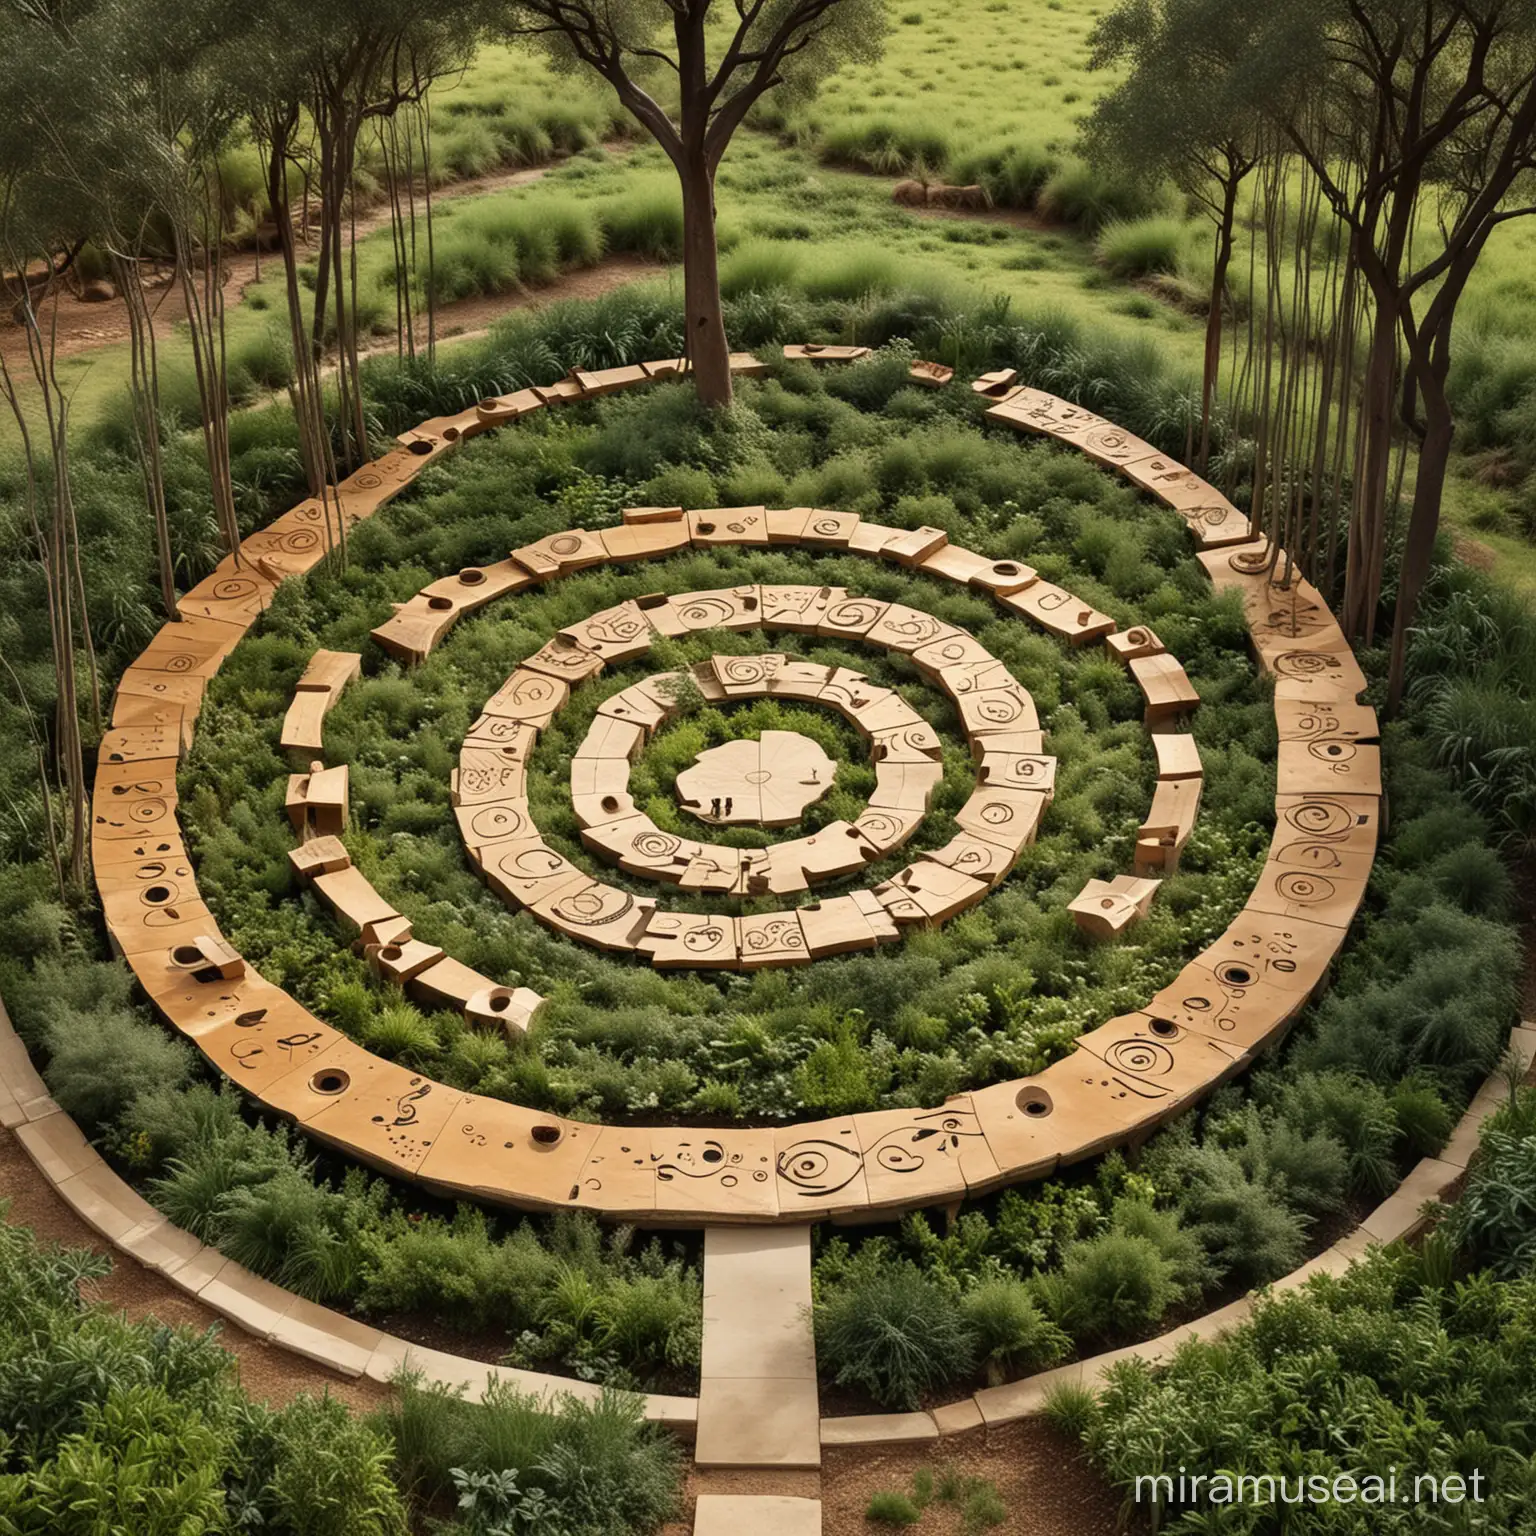 storytelling in exterior landscape architecture using symbols and colors of southern africa culture represent the culture and the stories sequence moving from space to space and seating in circular sunken seatings with forest surrounding